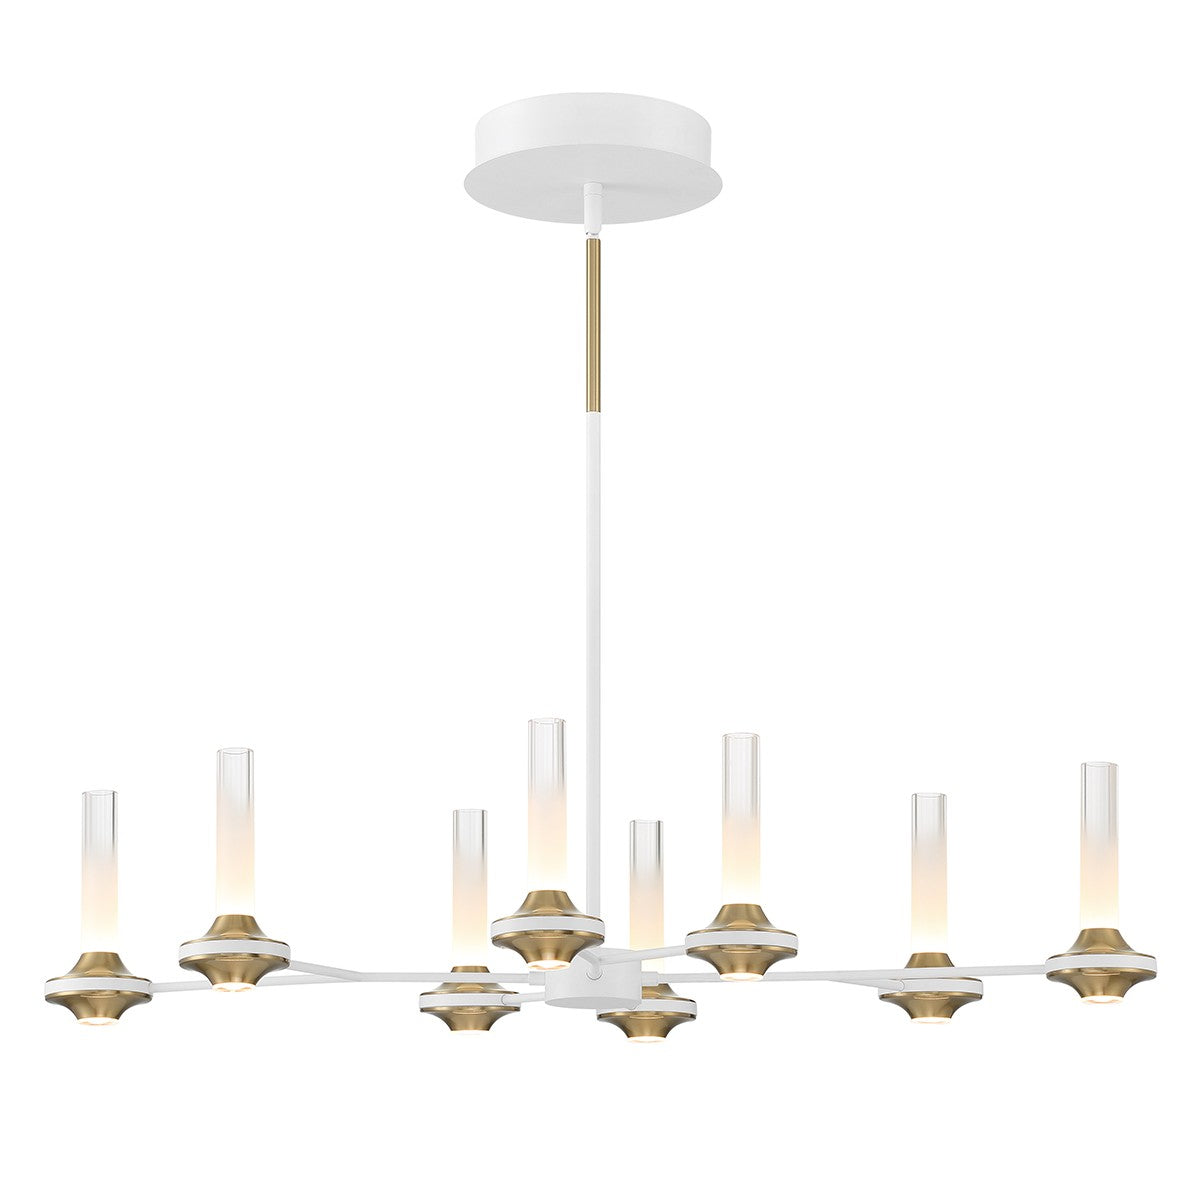 Eurofase Canada - 45714-023 - LED Chandelier - Torcia - White and Brass